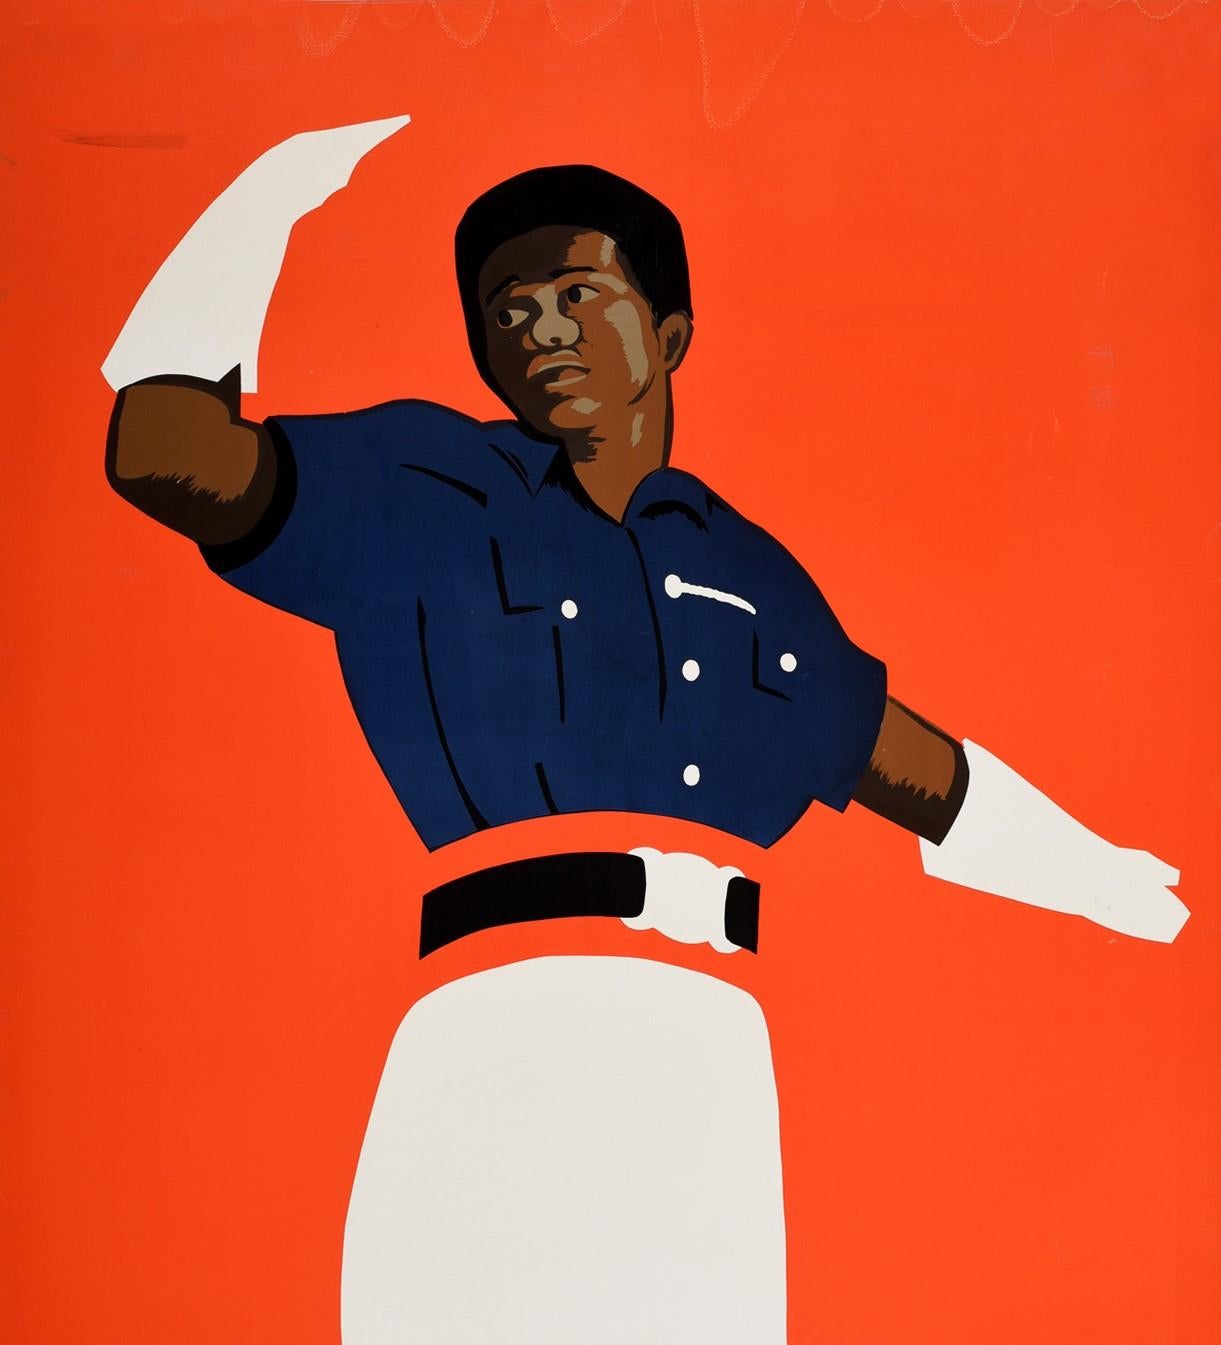 Original vintage travel poster for Fiji Hub of the South Pacific featuring a great design depicting a traffic police man in uniform wearing a blue shirt, white trousers and white gloves directing traffic with his arms against a red background with